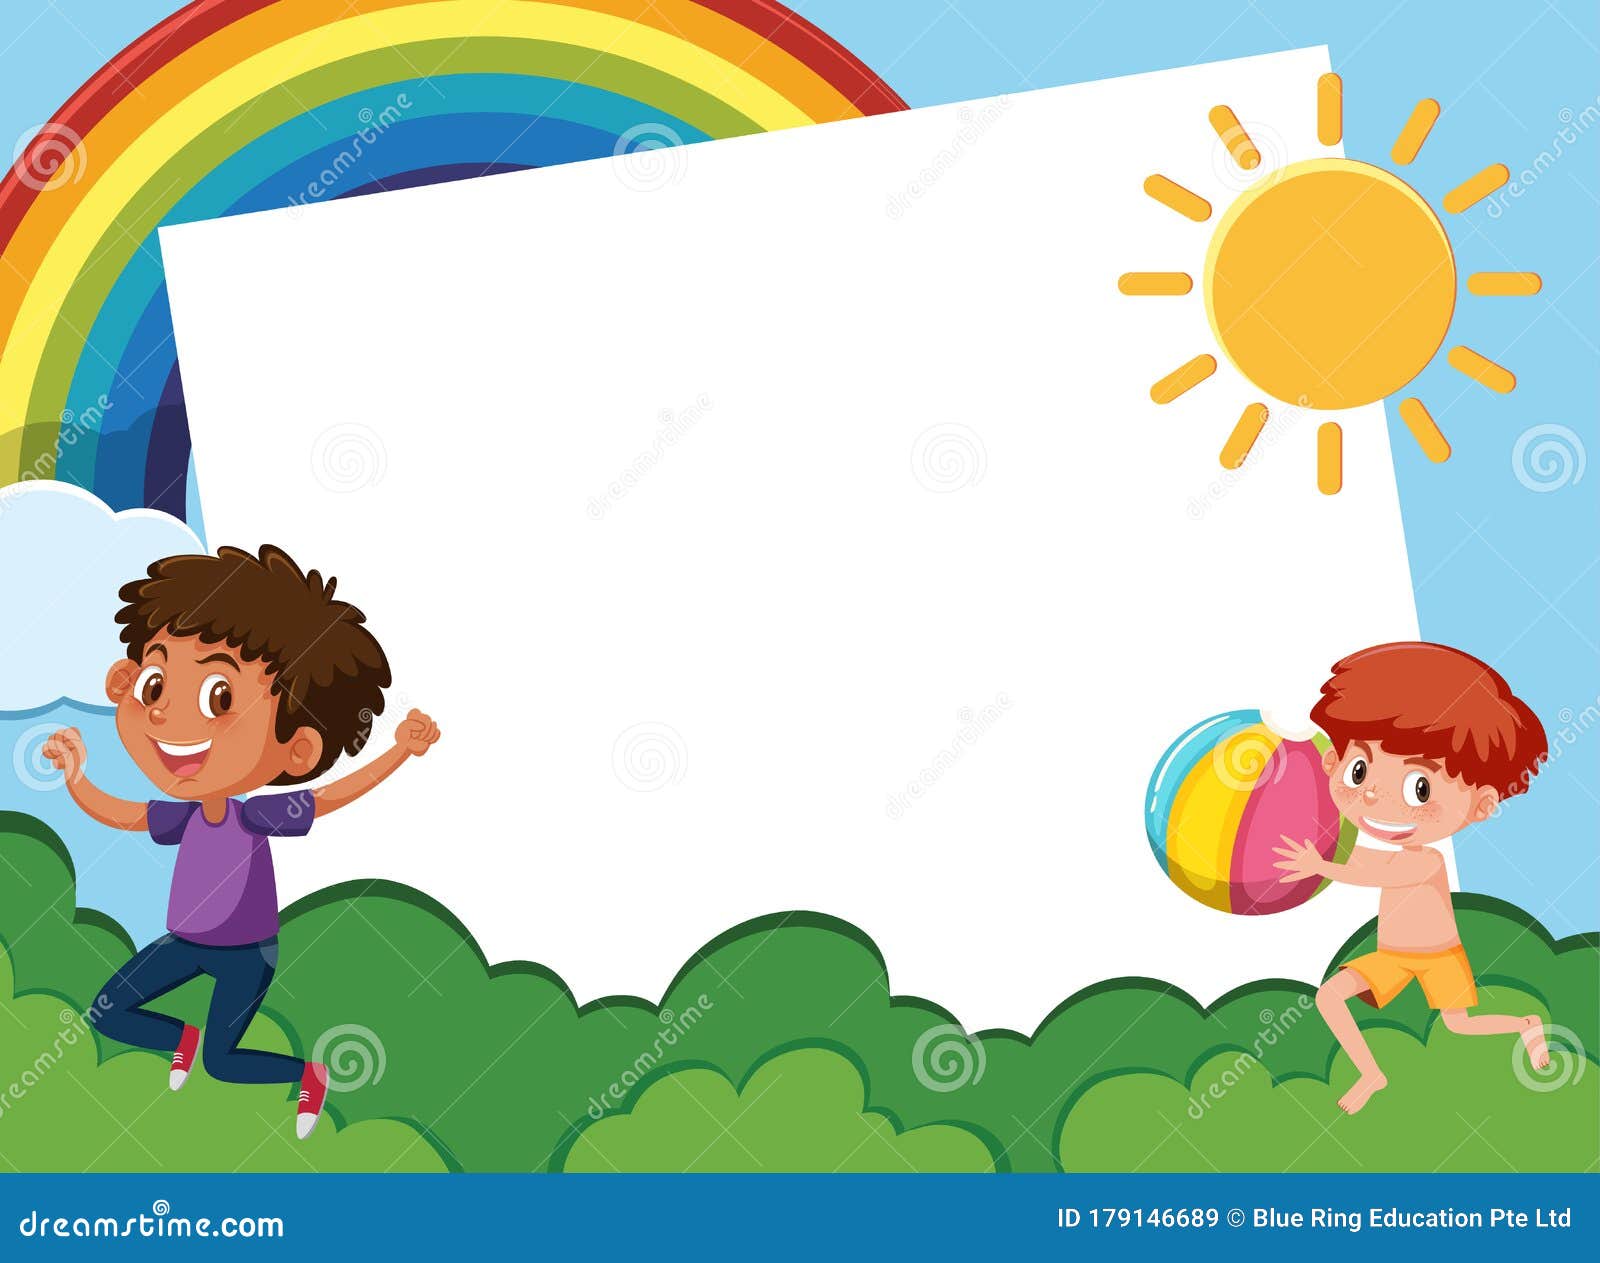 Background Template Design with Happy Boys in the Garden Stock Vector -  Illustration of children, cartoon: 179146689